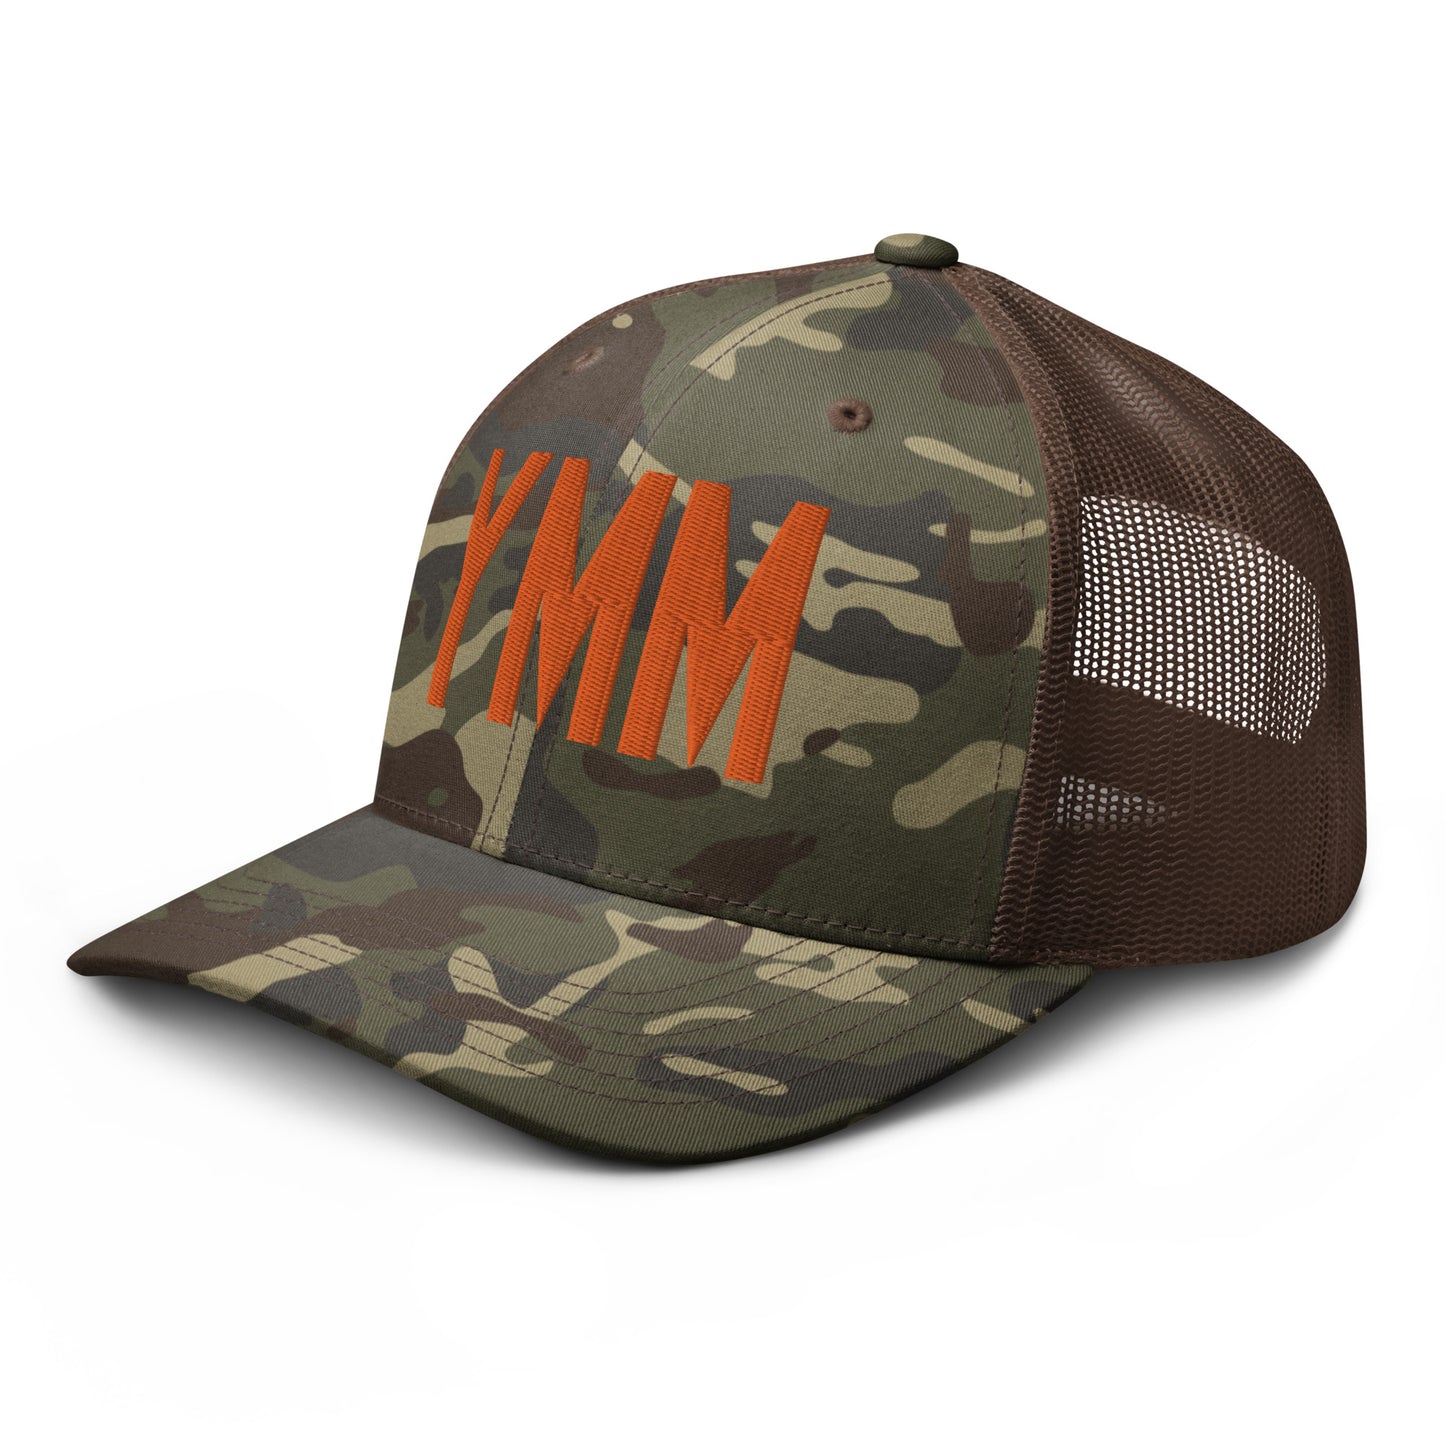 Airport Code Camouflage Trucker Hat - Orange • YMM Fort McMurray • YHM Designs - Image 15